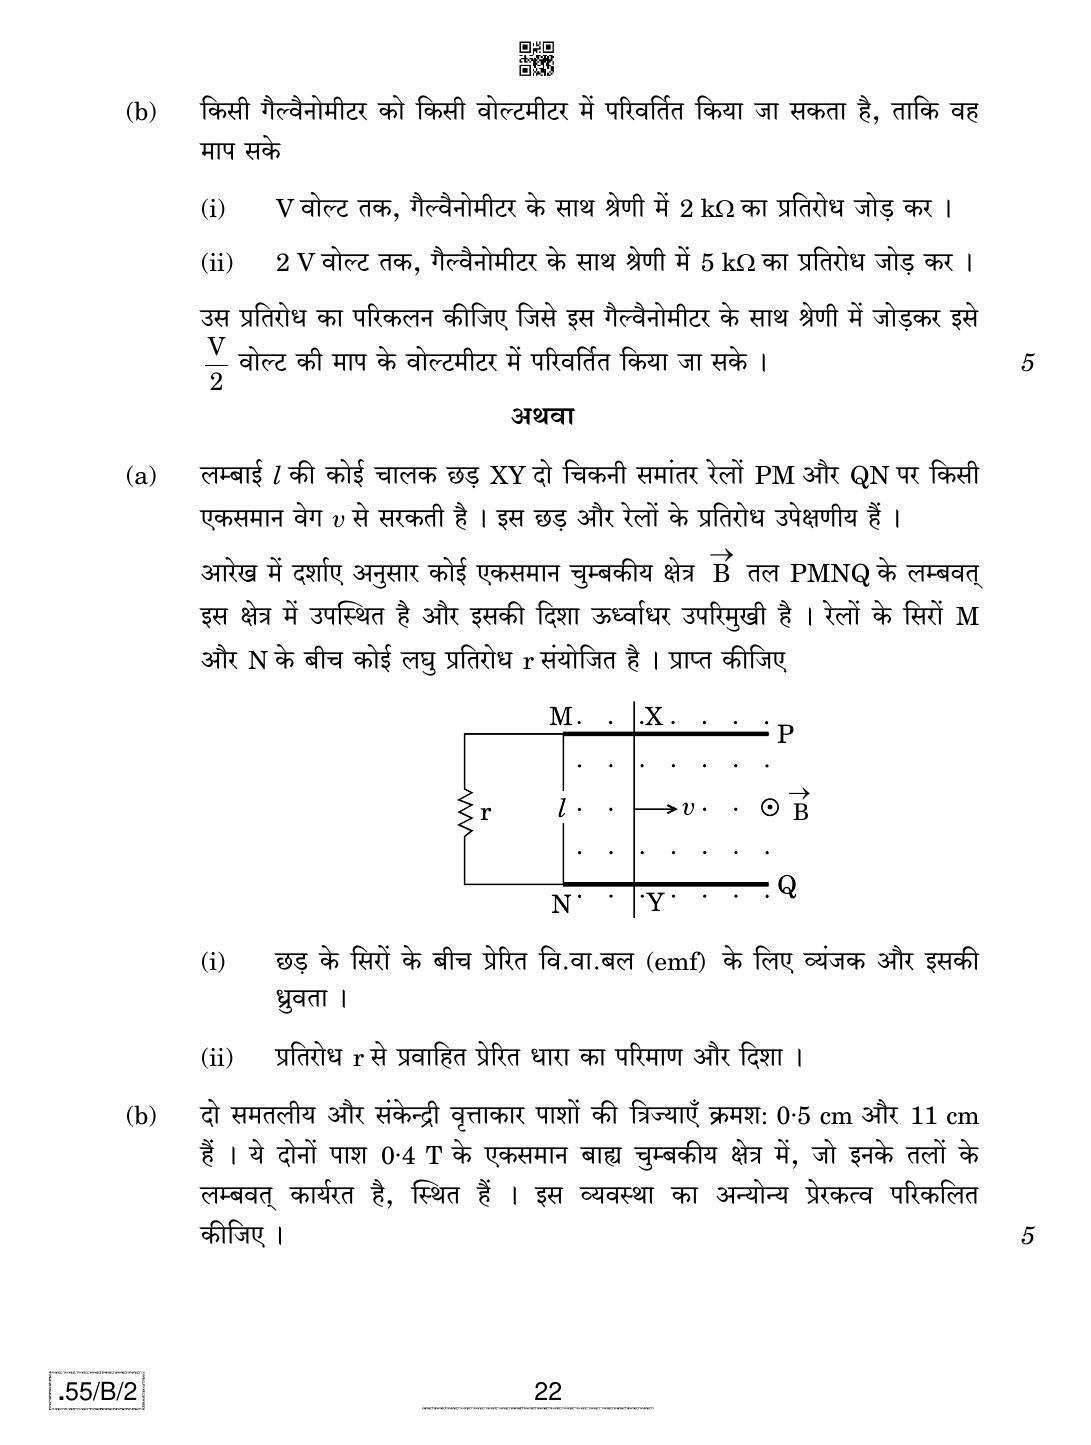 CBSE Class 12 55-C-2 - Physics 2020 Compartment Question Paper - Page 22